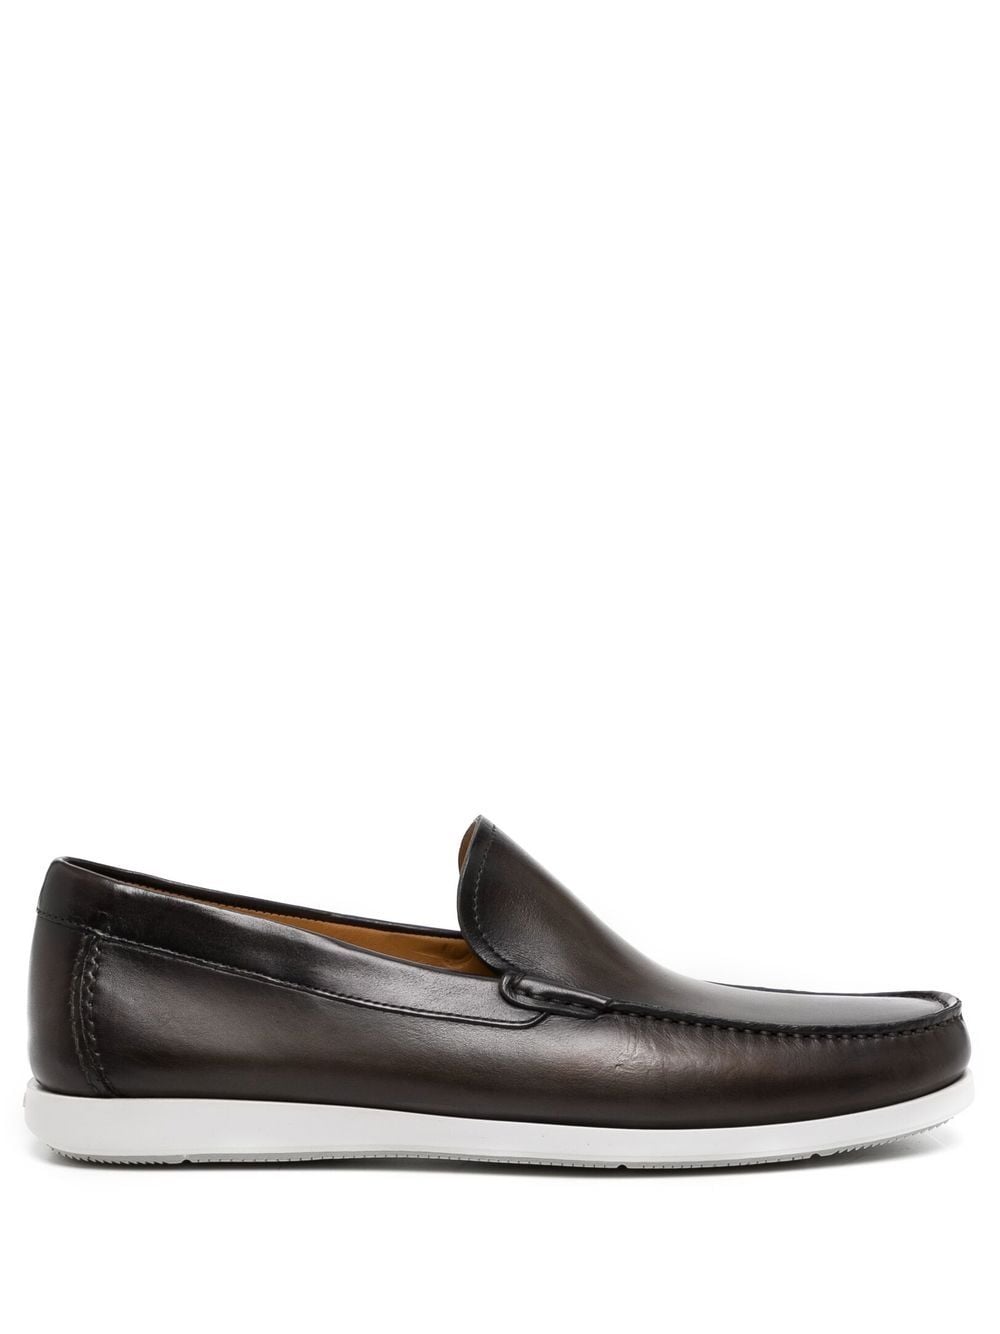 Magnanni leather slip-on loafers - Brown